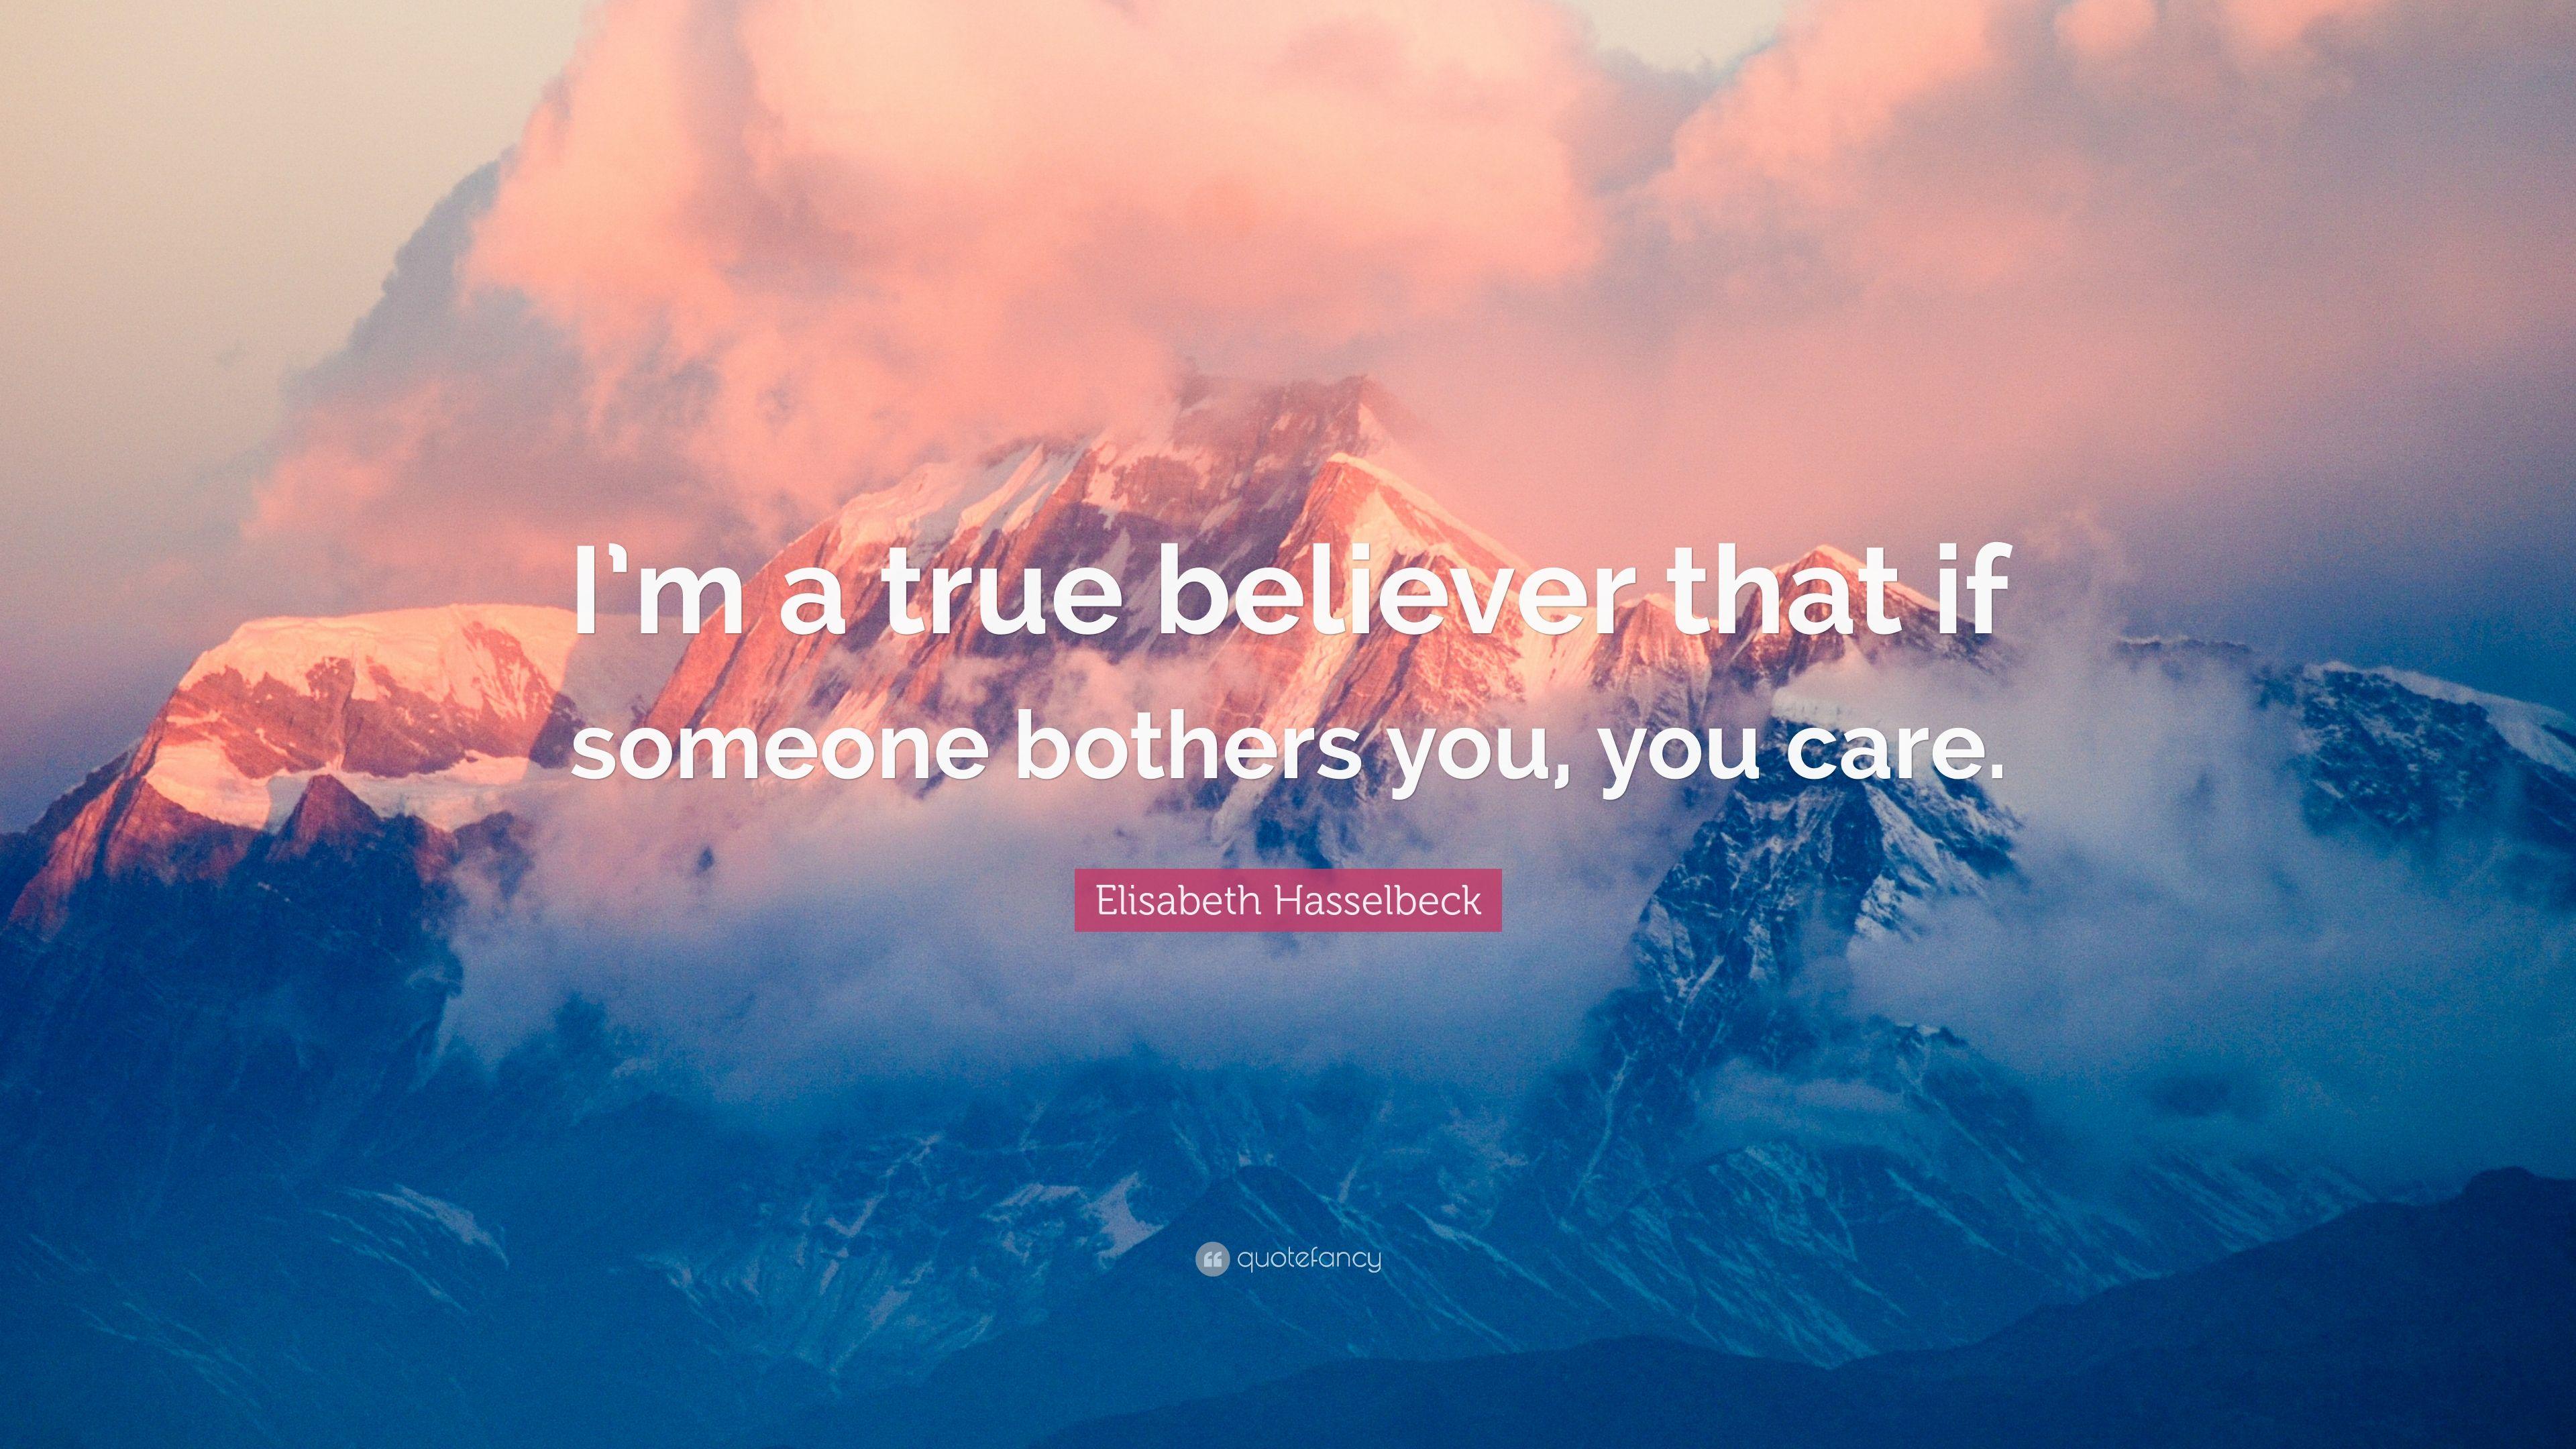 Elisabeth Hasselbeck Quote: “I'm a true believer that if someone